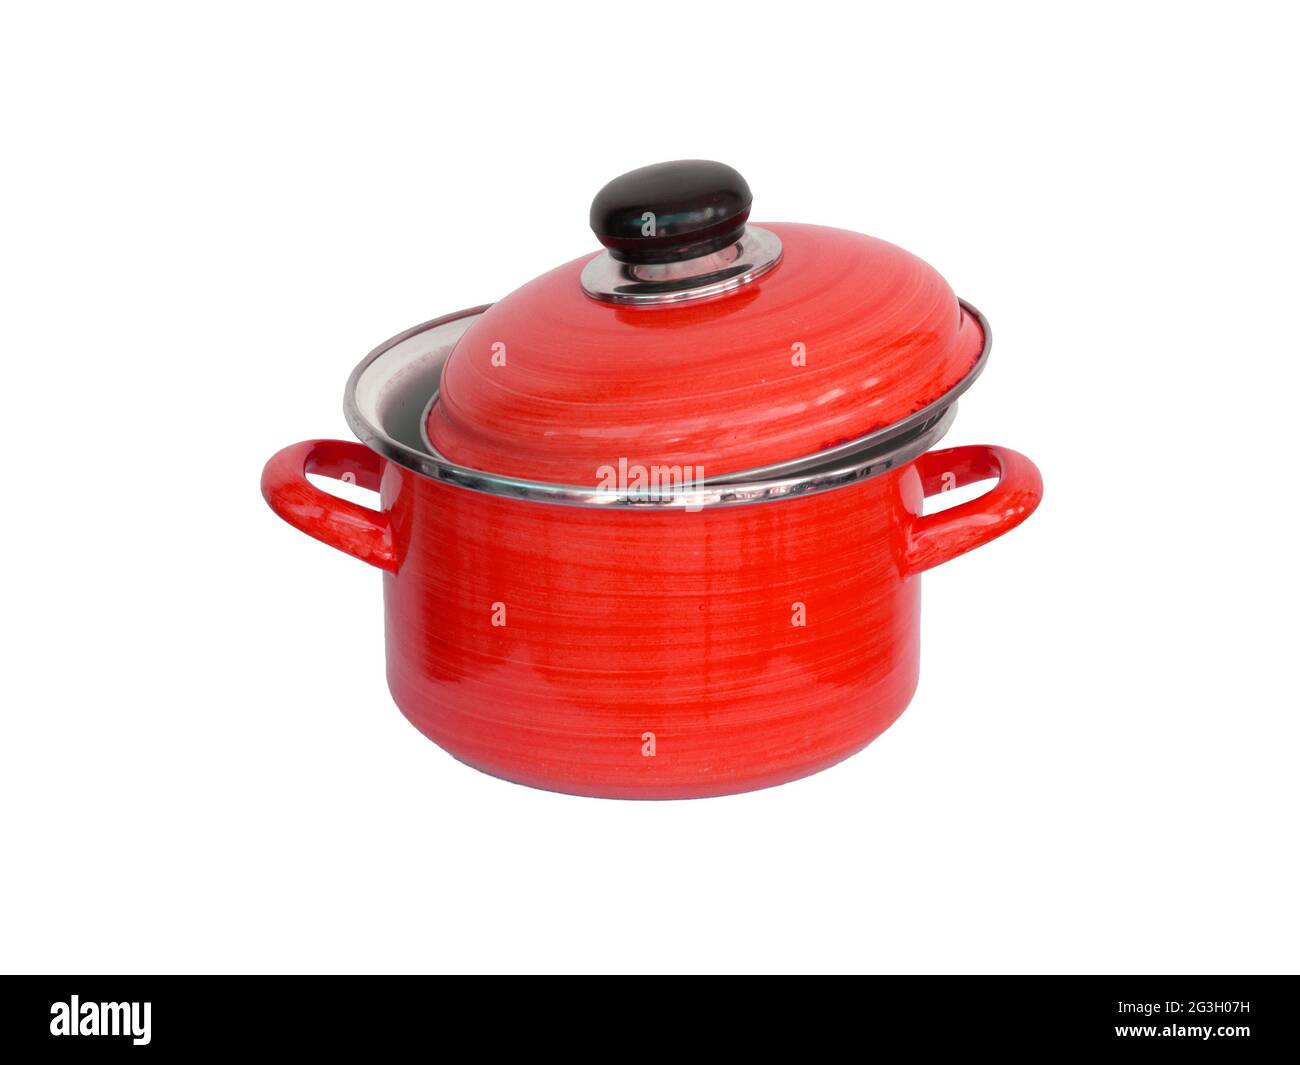 Old red metal cooking pot Stock Photo